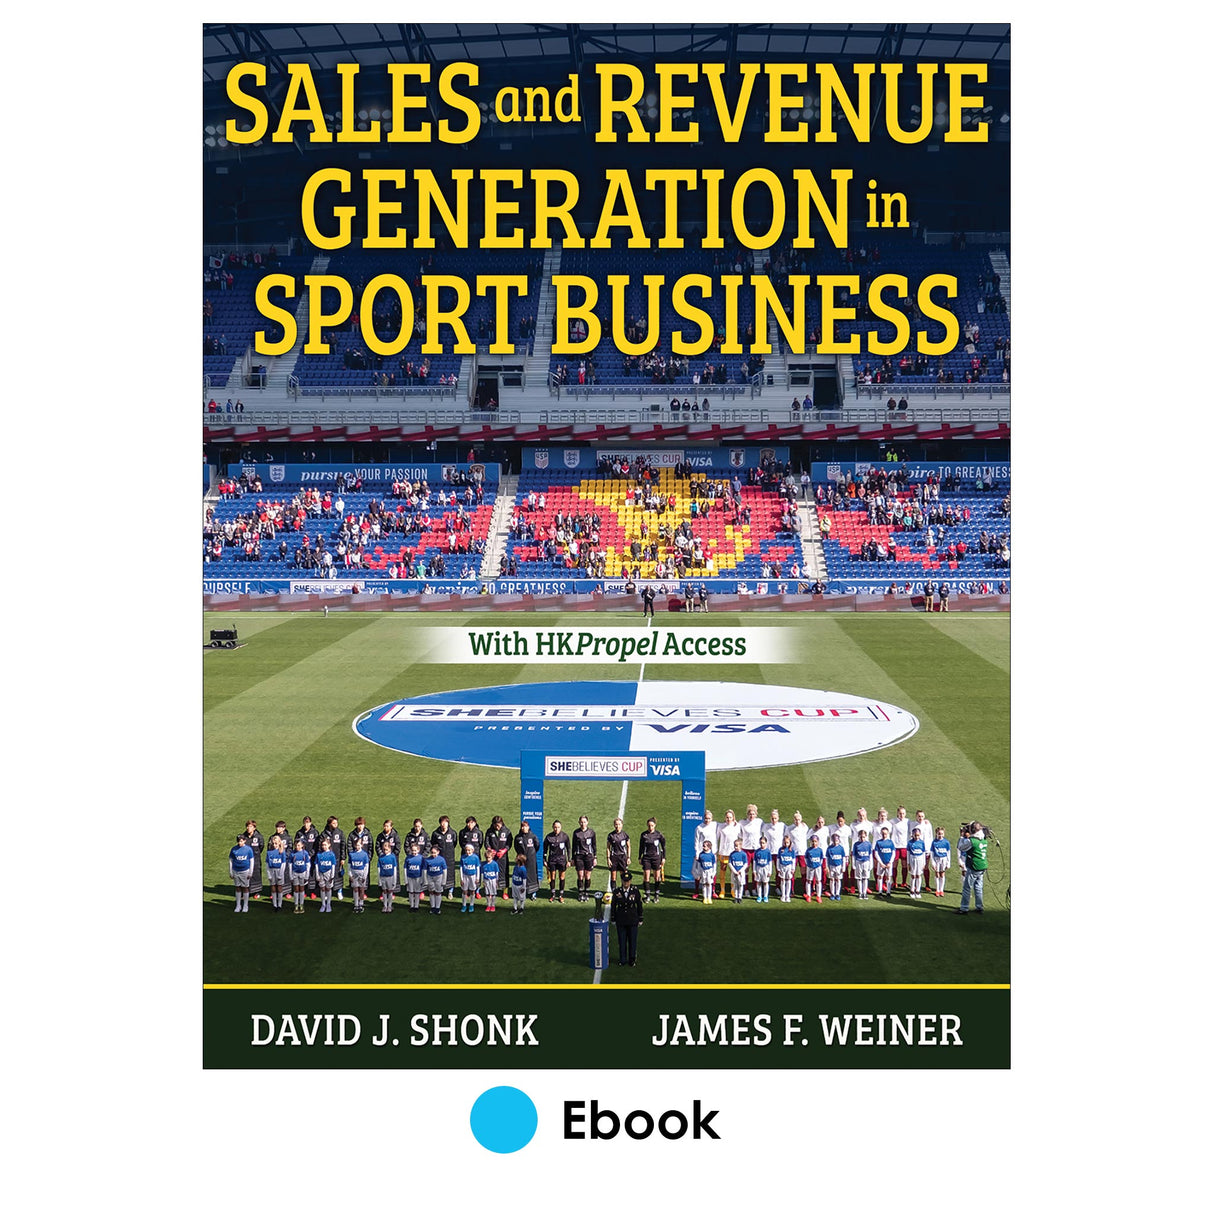 Sales and Revenue Generation in Sport Business Ebook With HKPropel Access